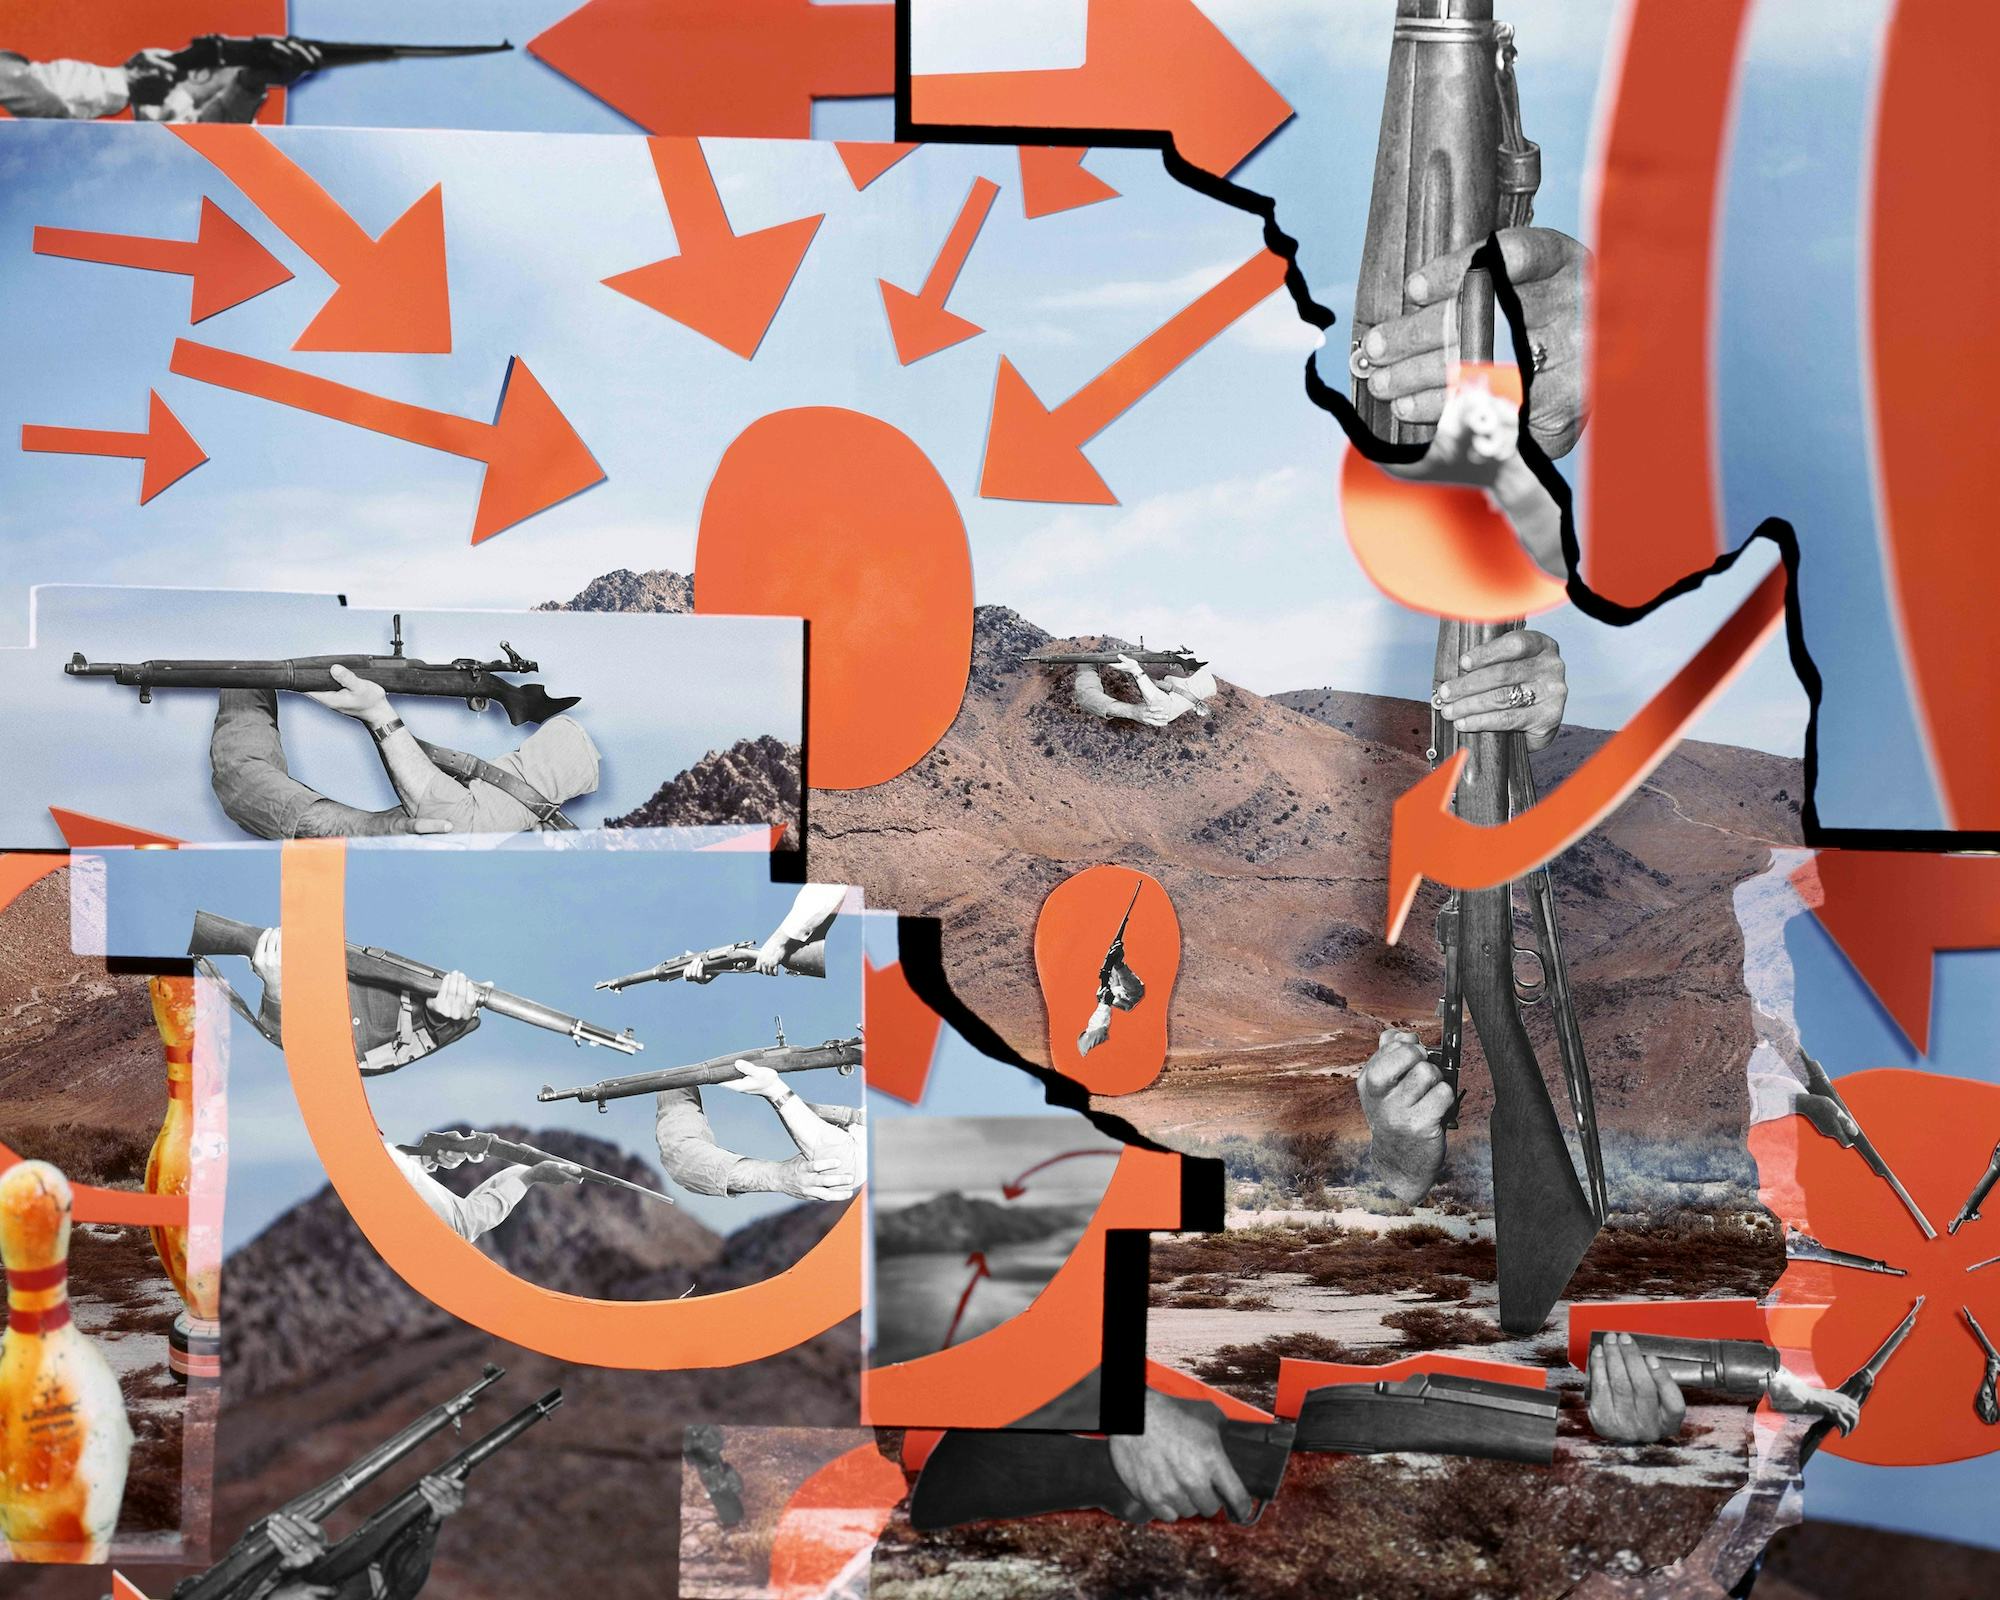 Analogue photo collage showing landscape images of the West Desert in Utah, covered by orange arrows © Jaclyn Wright